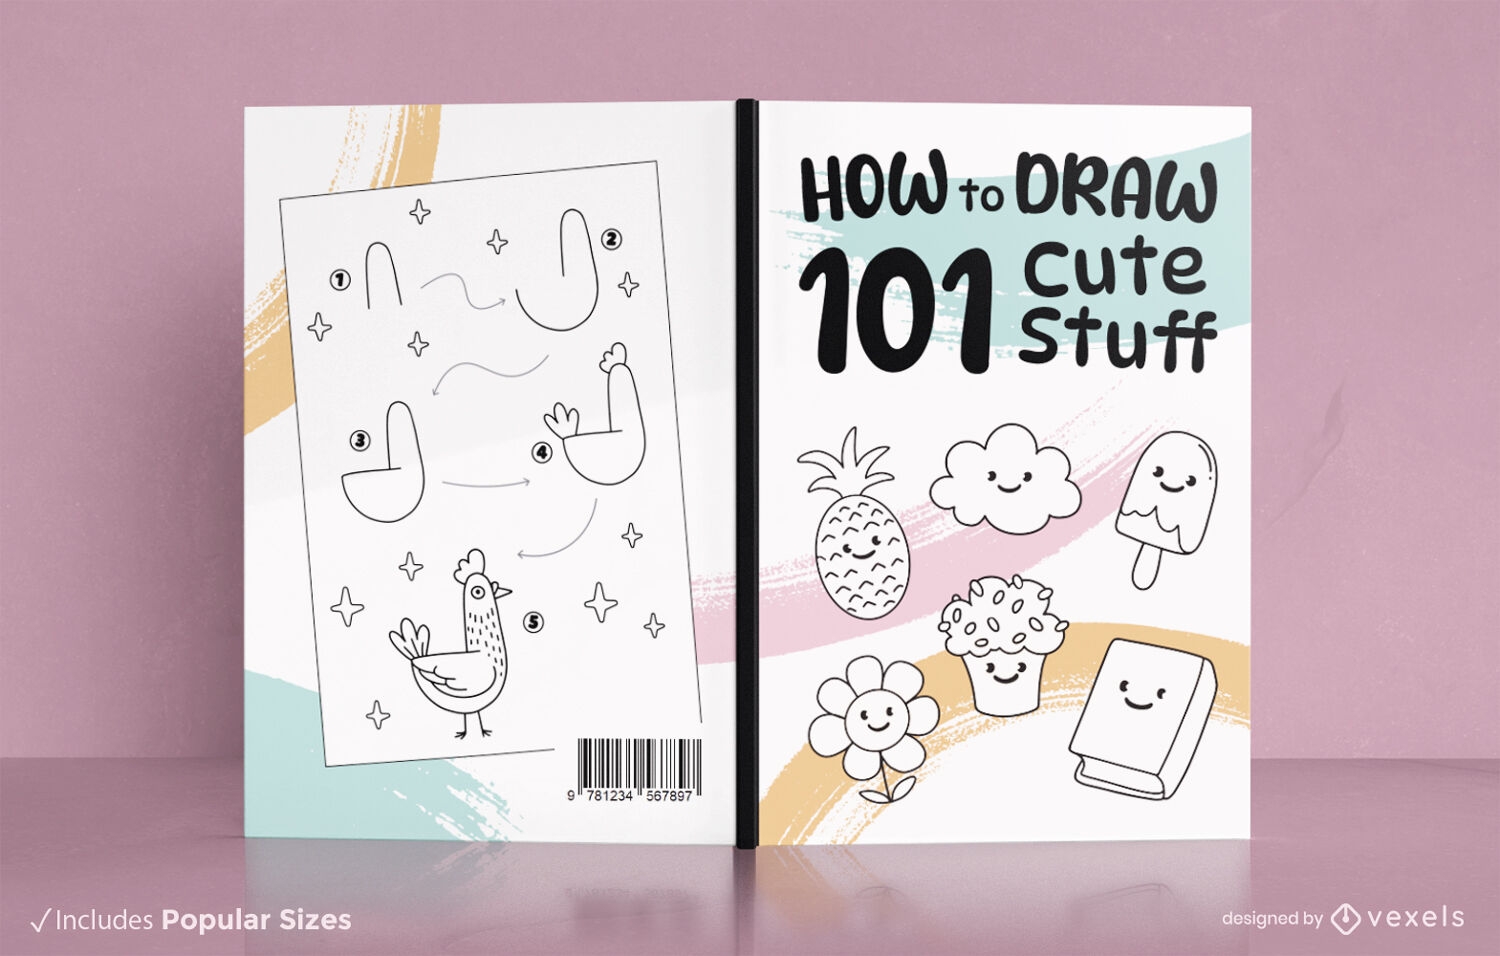 Cute drawing elements book cover design